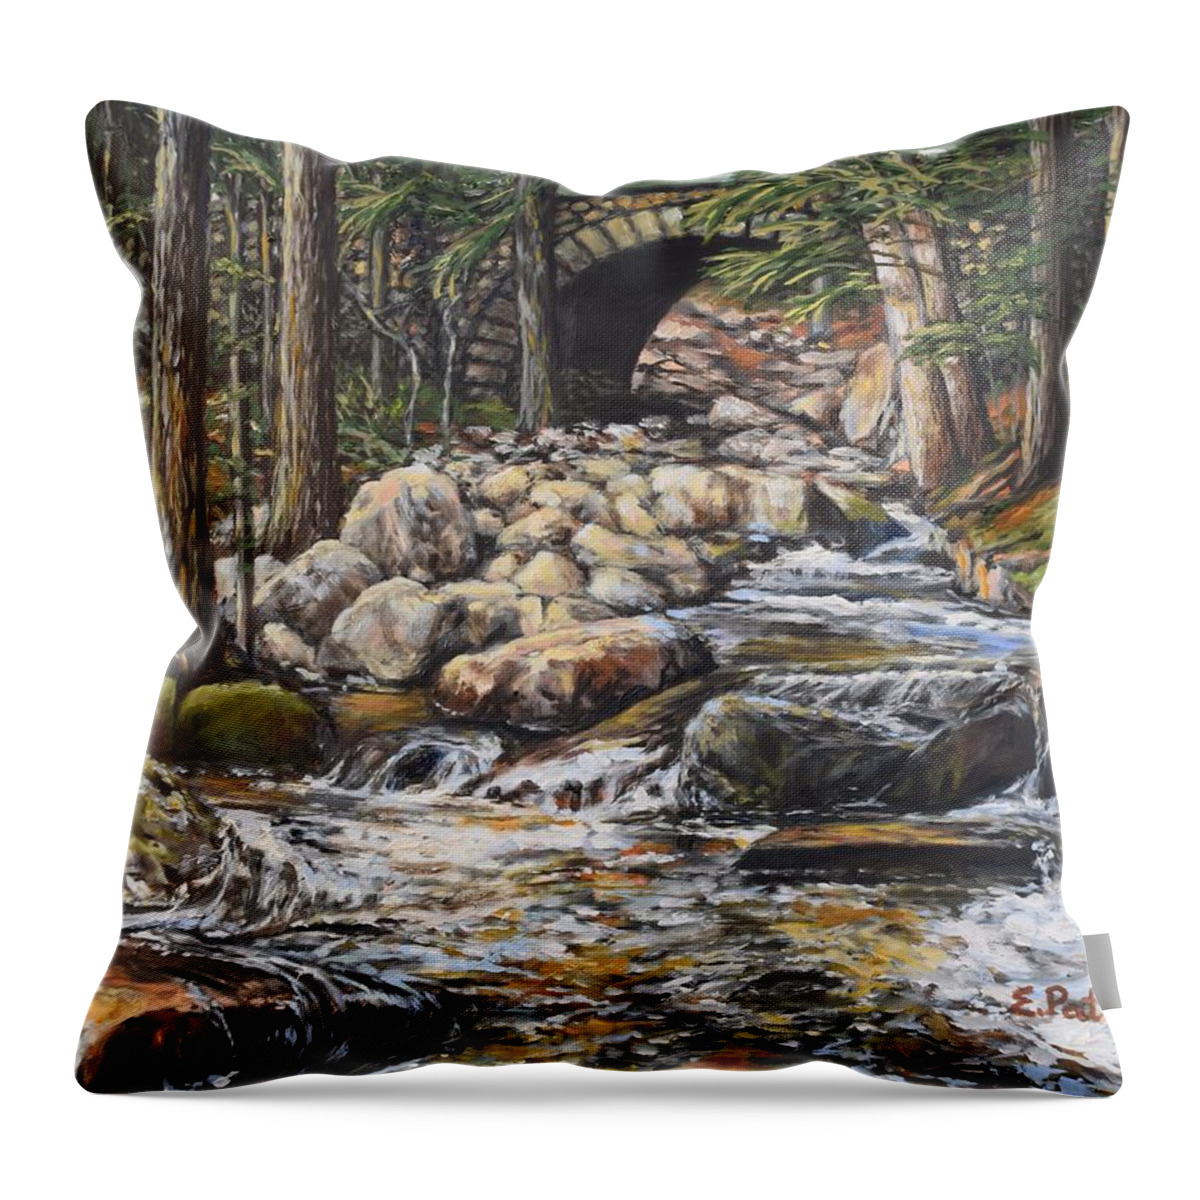 Maine Throw Pillow featuring the painting Cobblestone Bridge, Acadia National Park by Eileen Patten Oliver